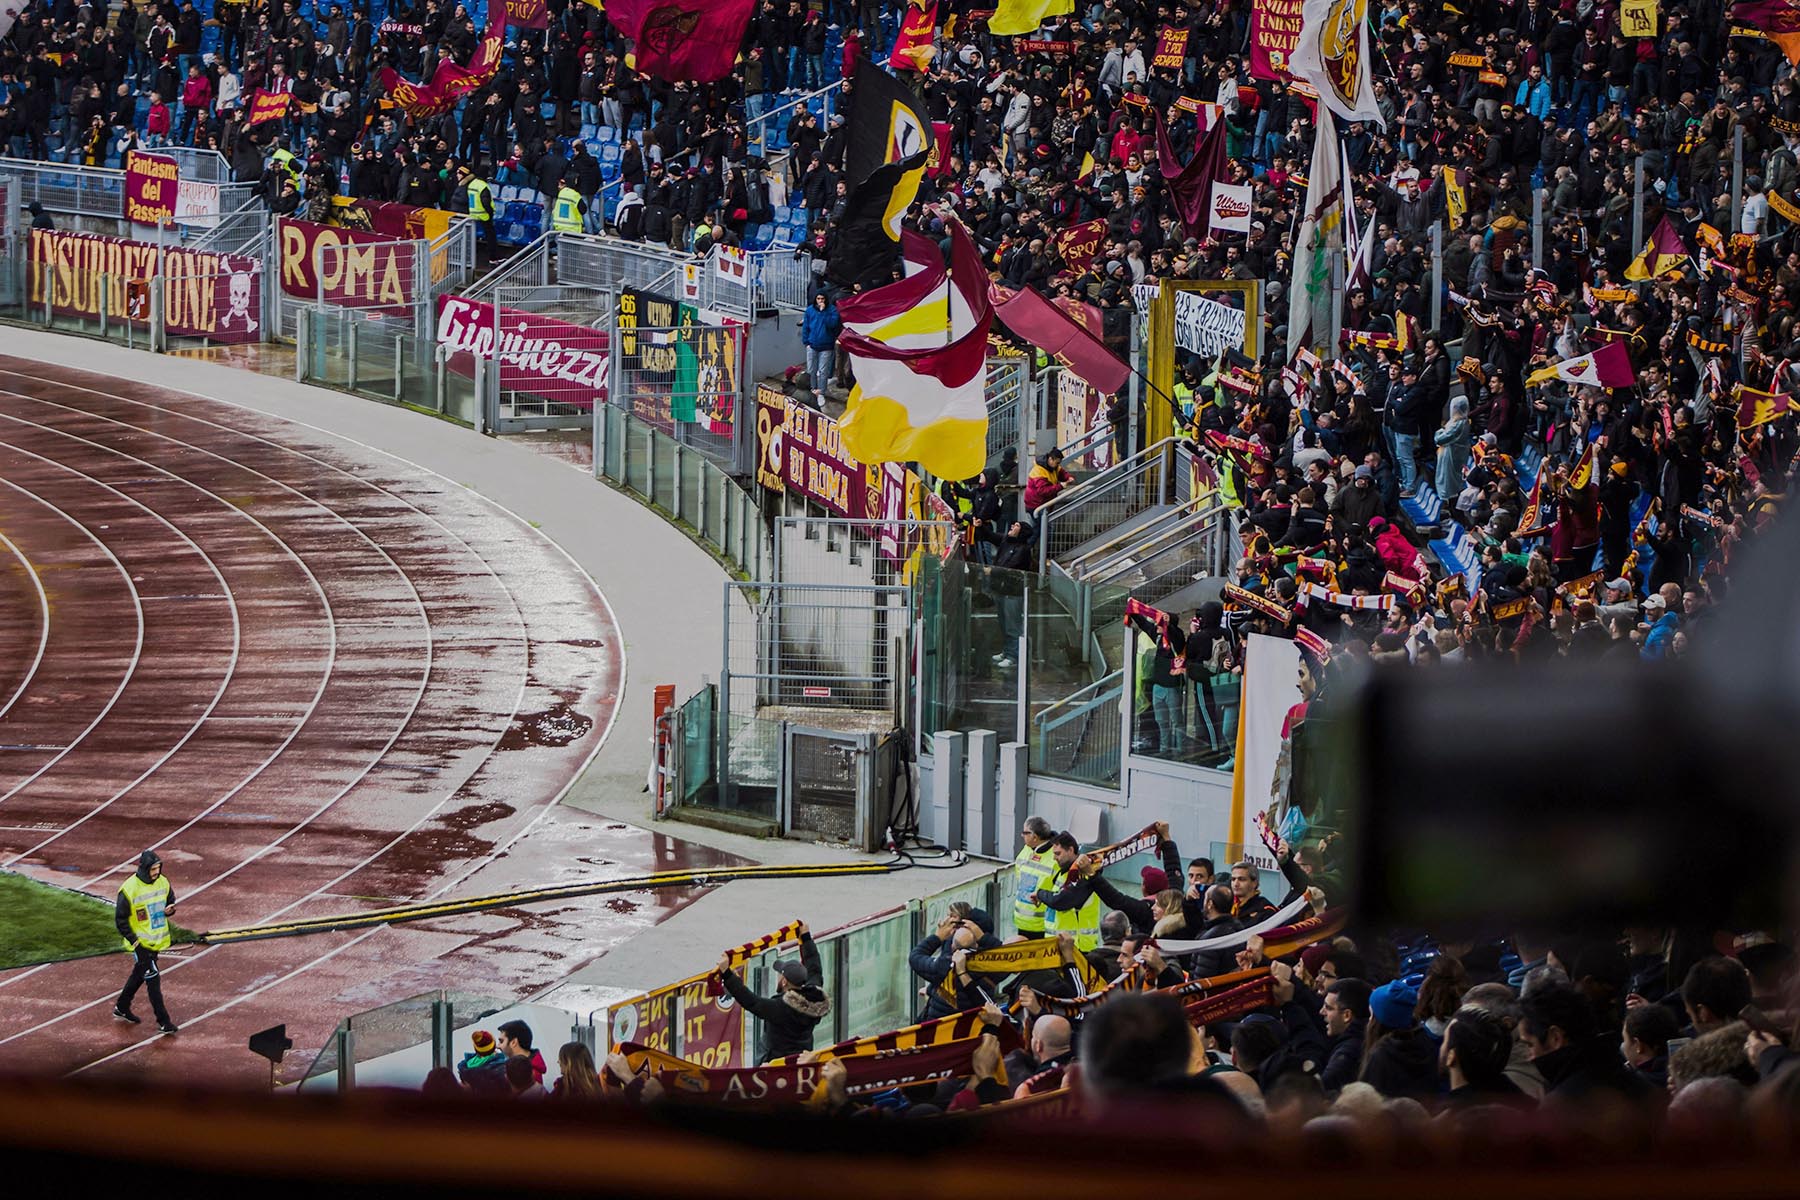 Large crowd of AC Roma supporters standing in the stands of a stadium.